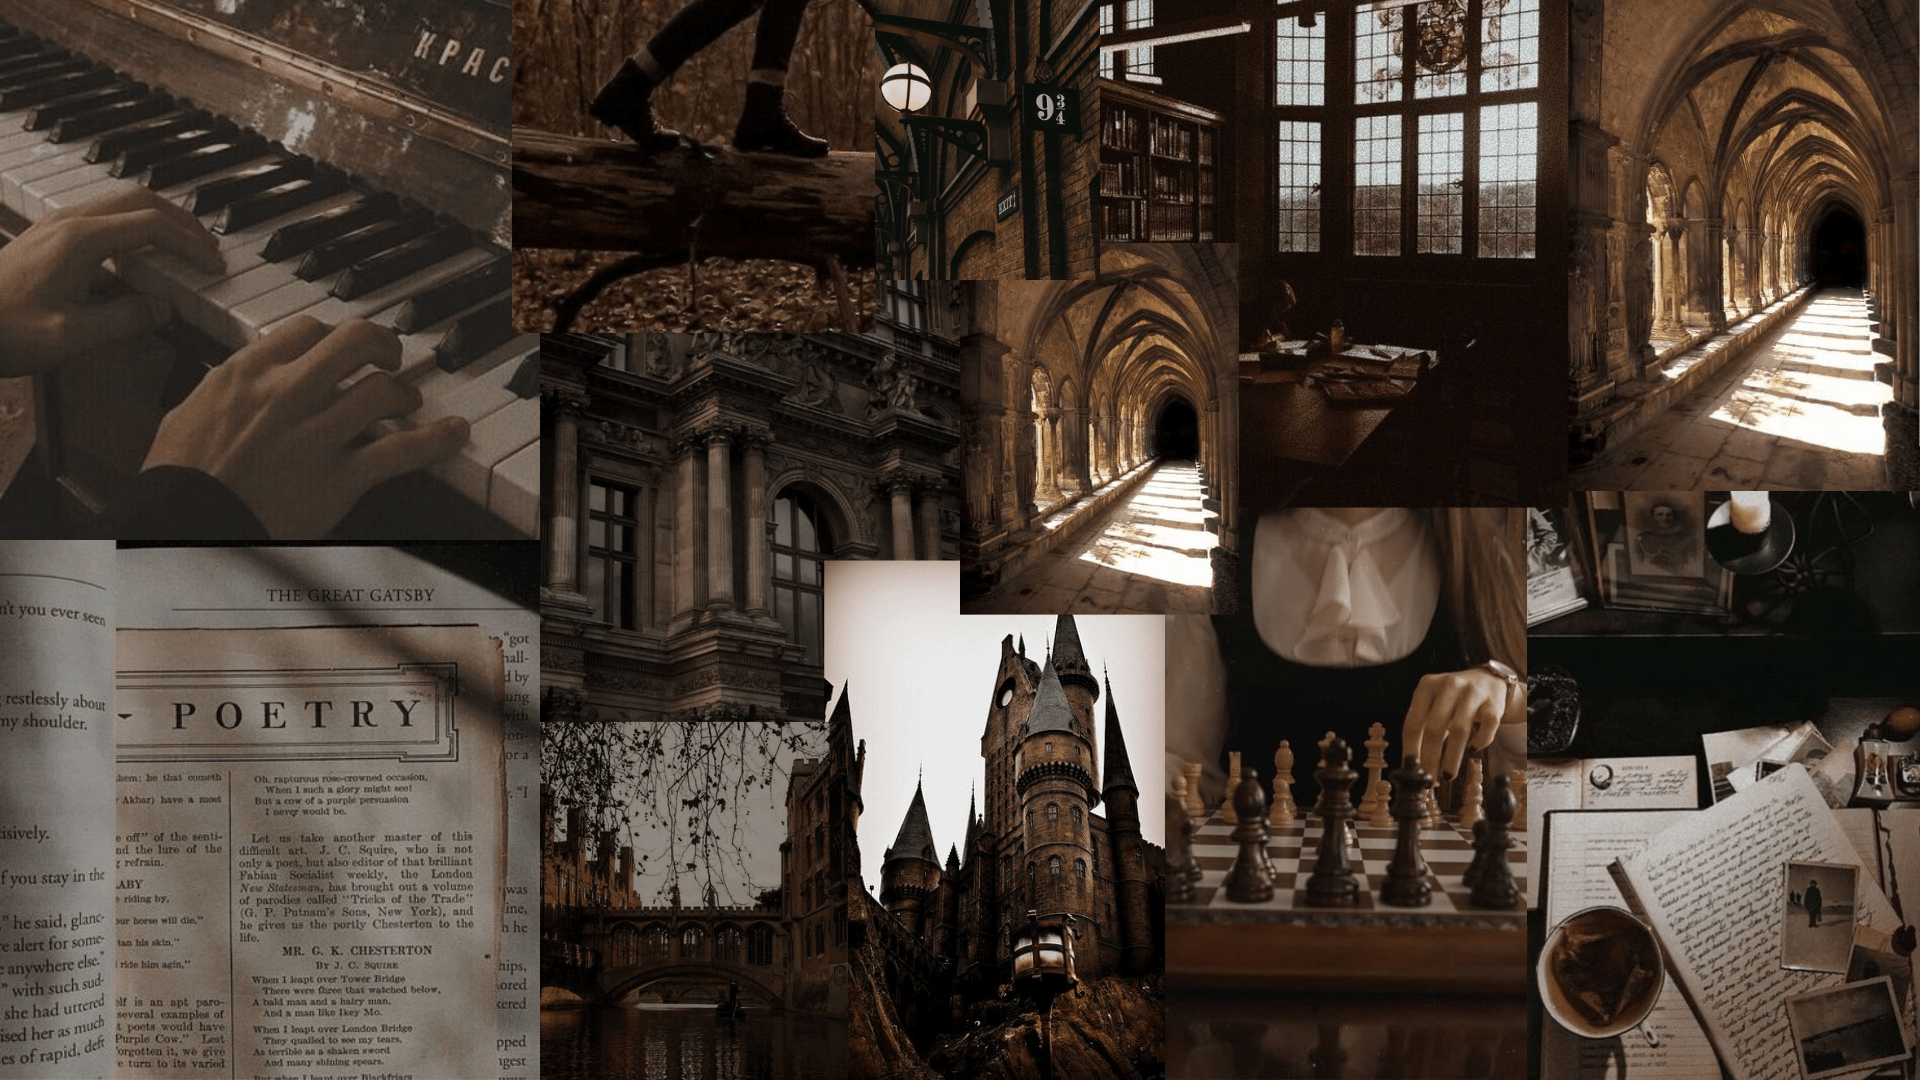 A collage of images, including a book, a cathedral, a chessboard, and a piano. - Dark academia